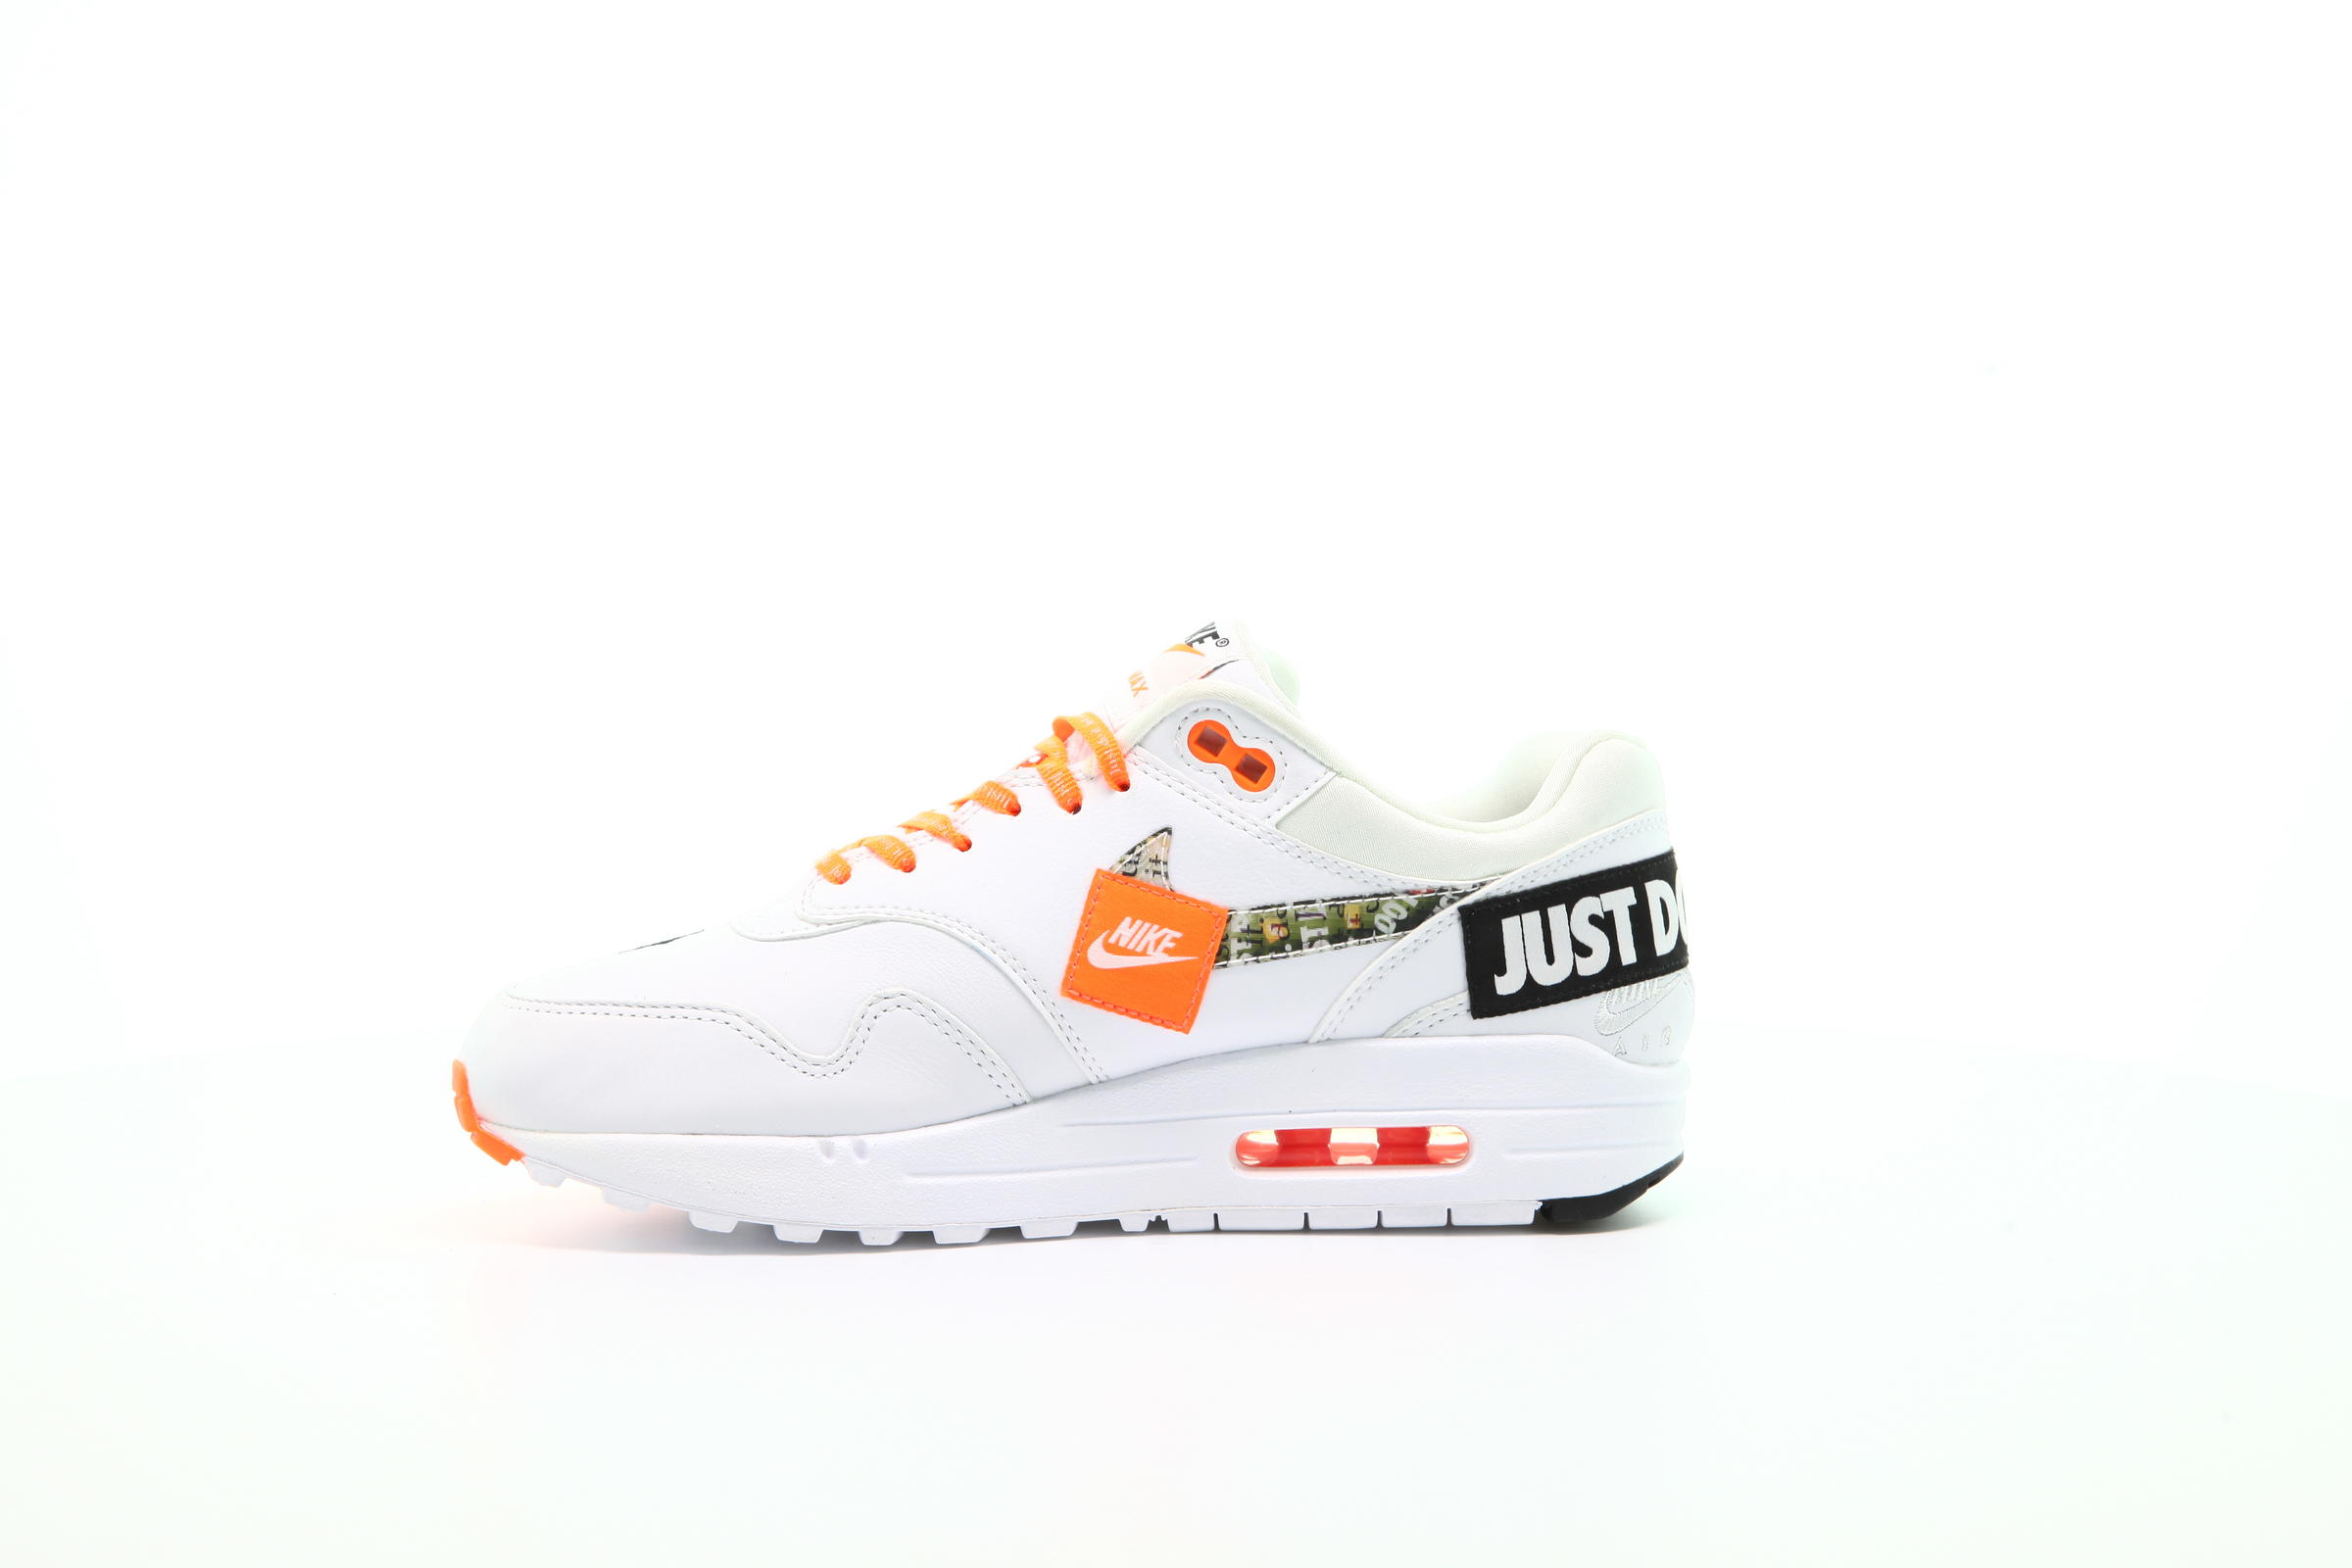 Nike Wmns Air Max 1 Lx Just Do It "White"